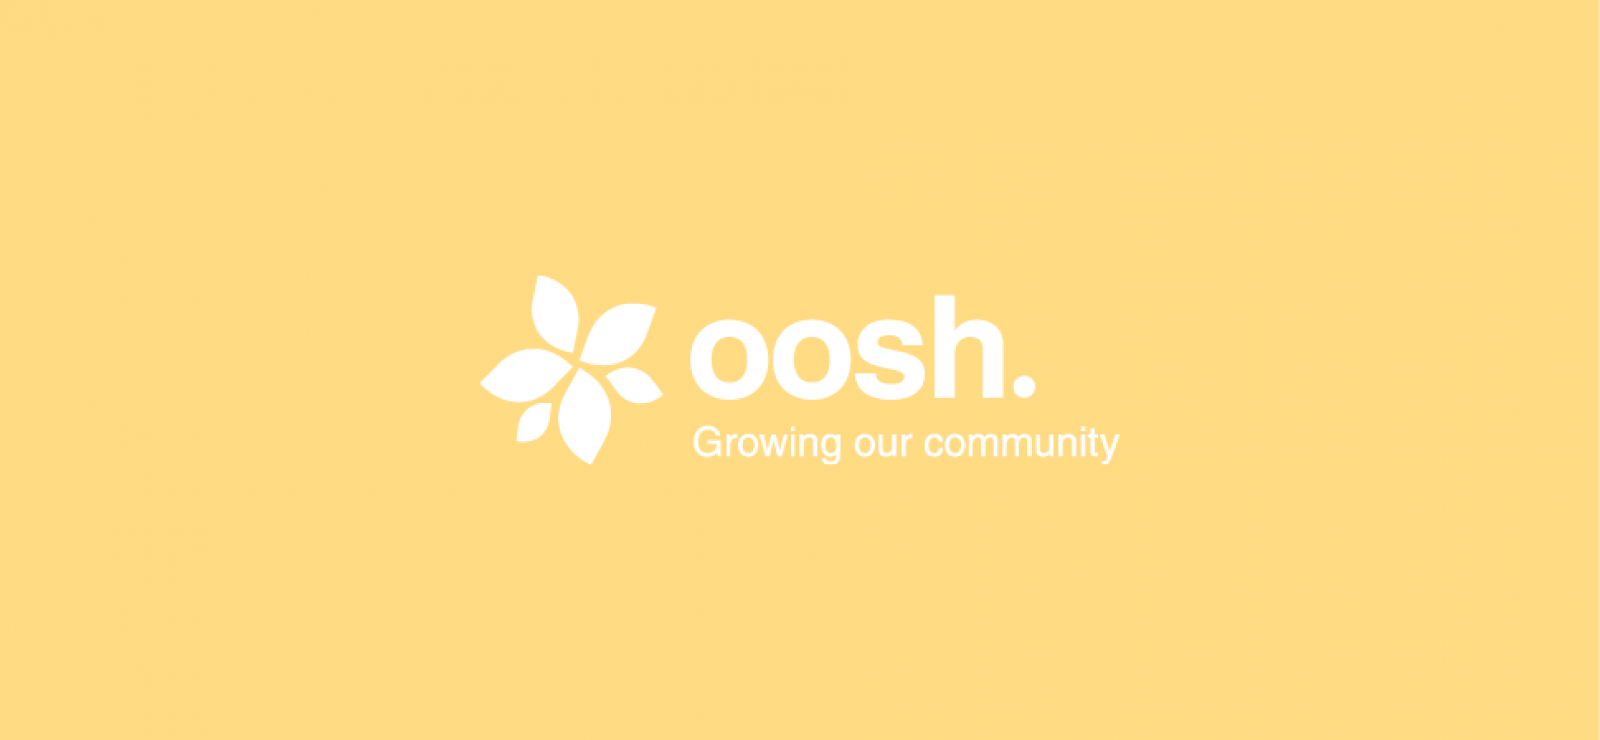 OOSH logo on a yellow background banner image